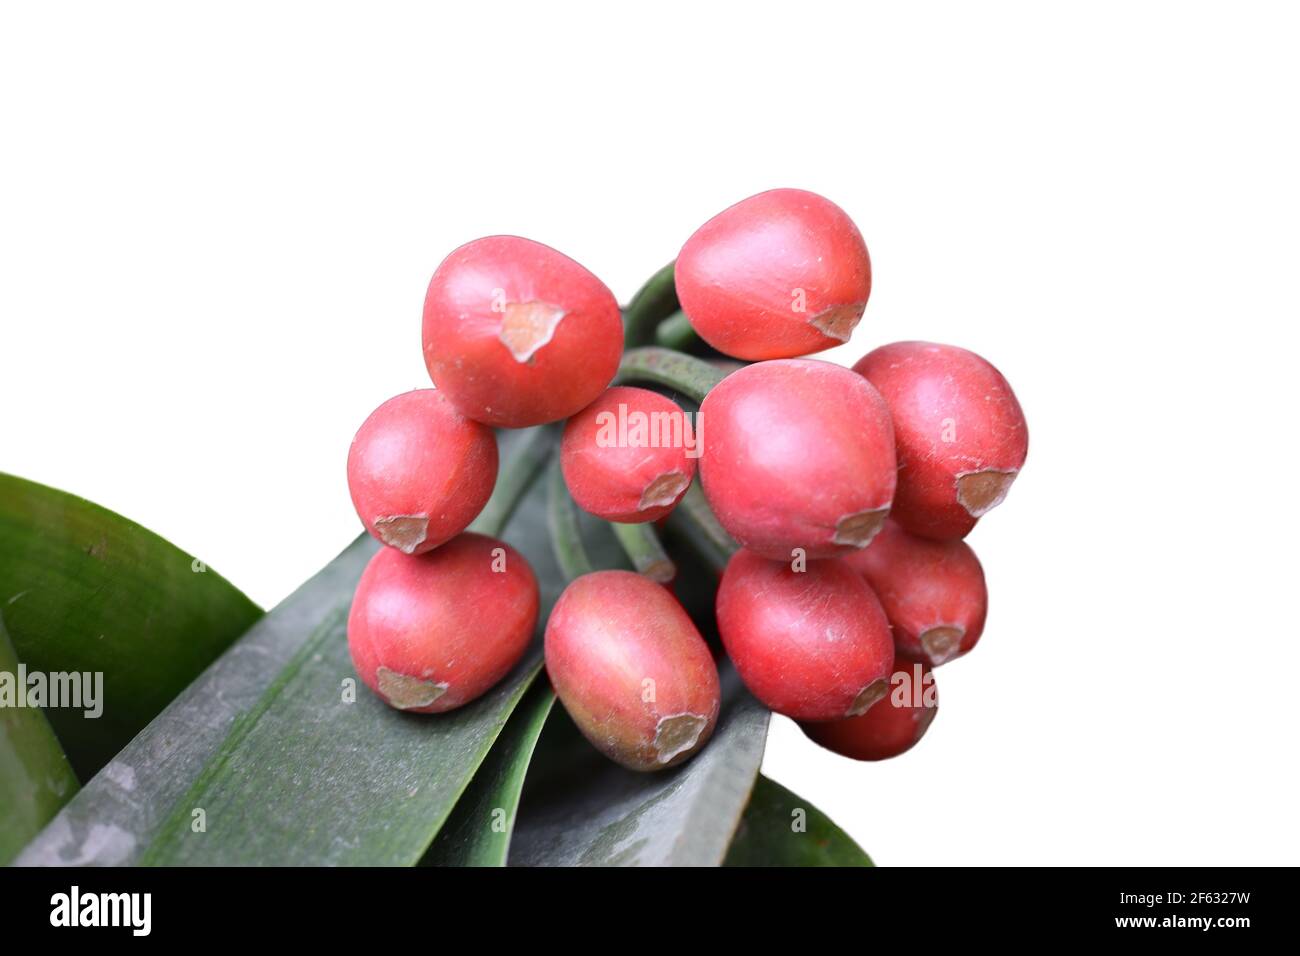 Exotic Red Bush Lily Seeds bunch with long green leaves Stock Photo